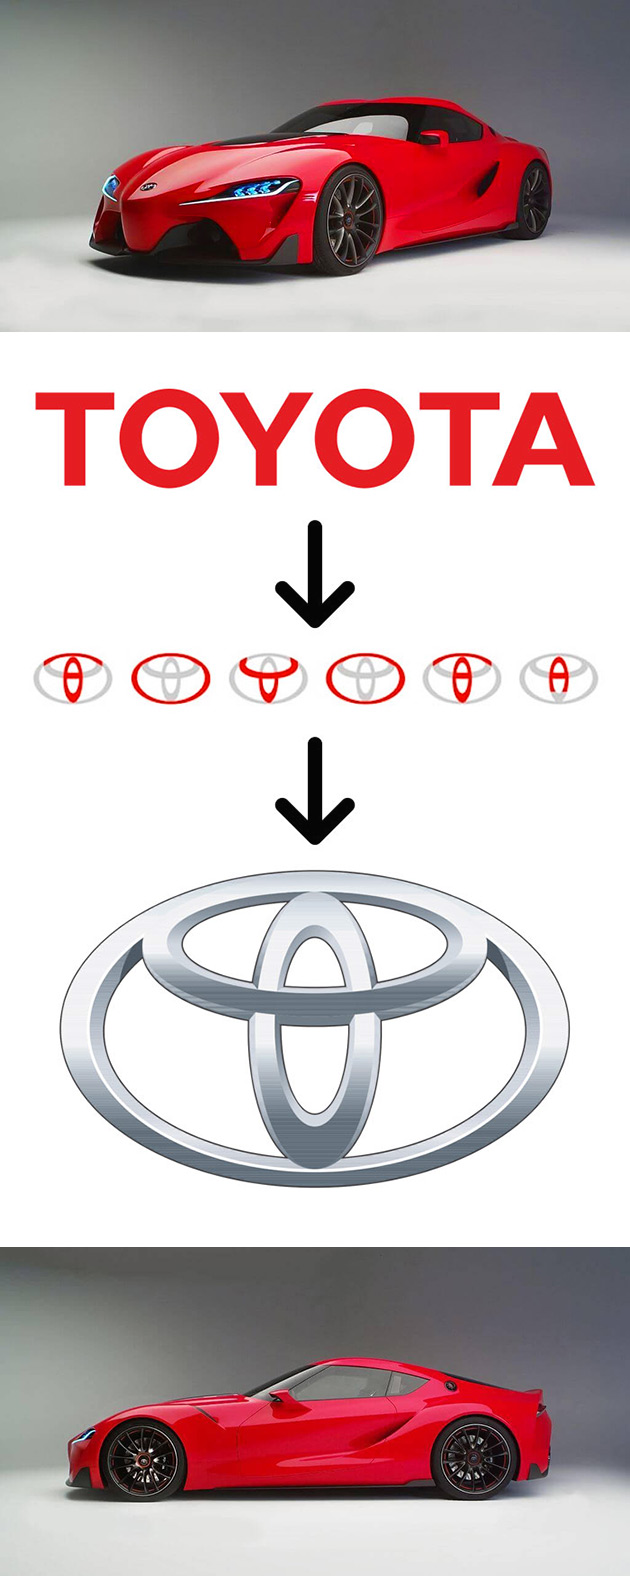 toyota-spelled-out-and-10-more-hidden-meanings-in-famous-logos-techeblog